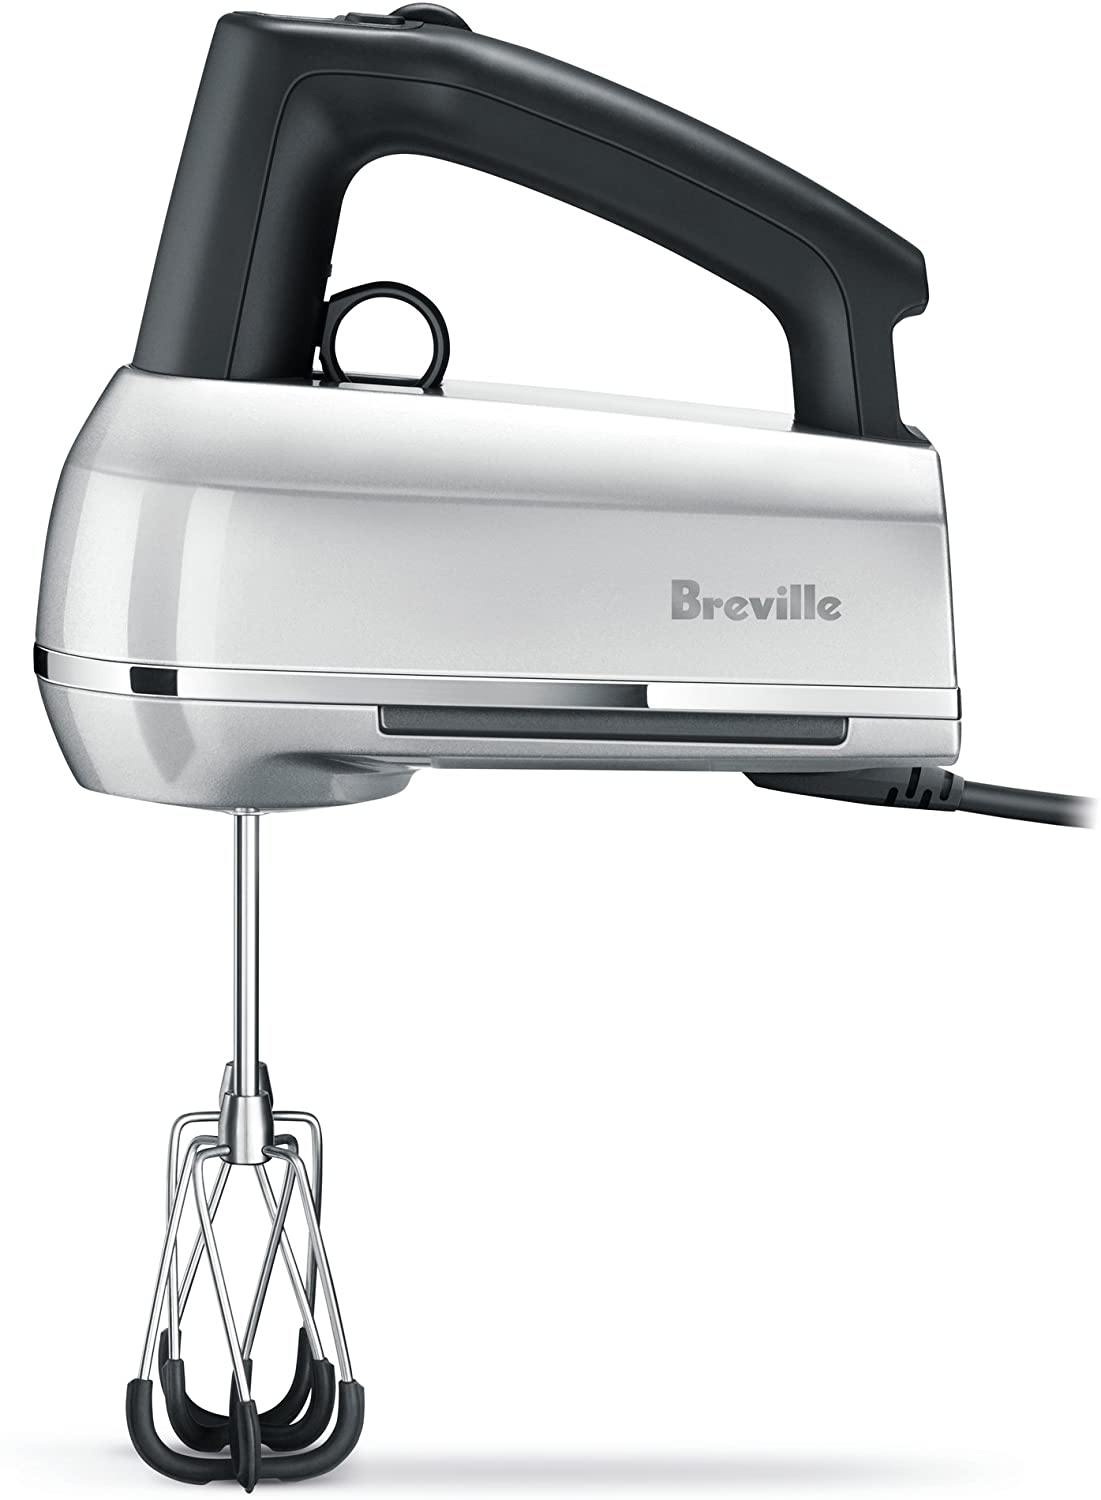 Best Overall, Best High-End, and Most Loved by Customers Hand Mixer